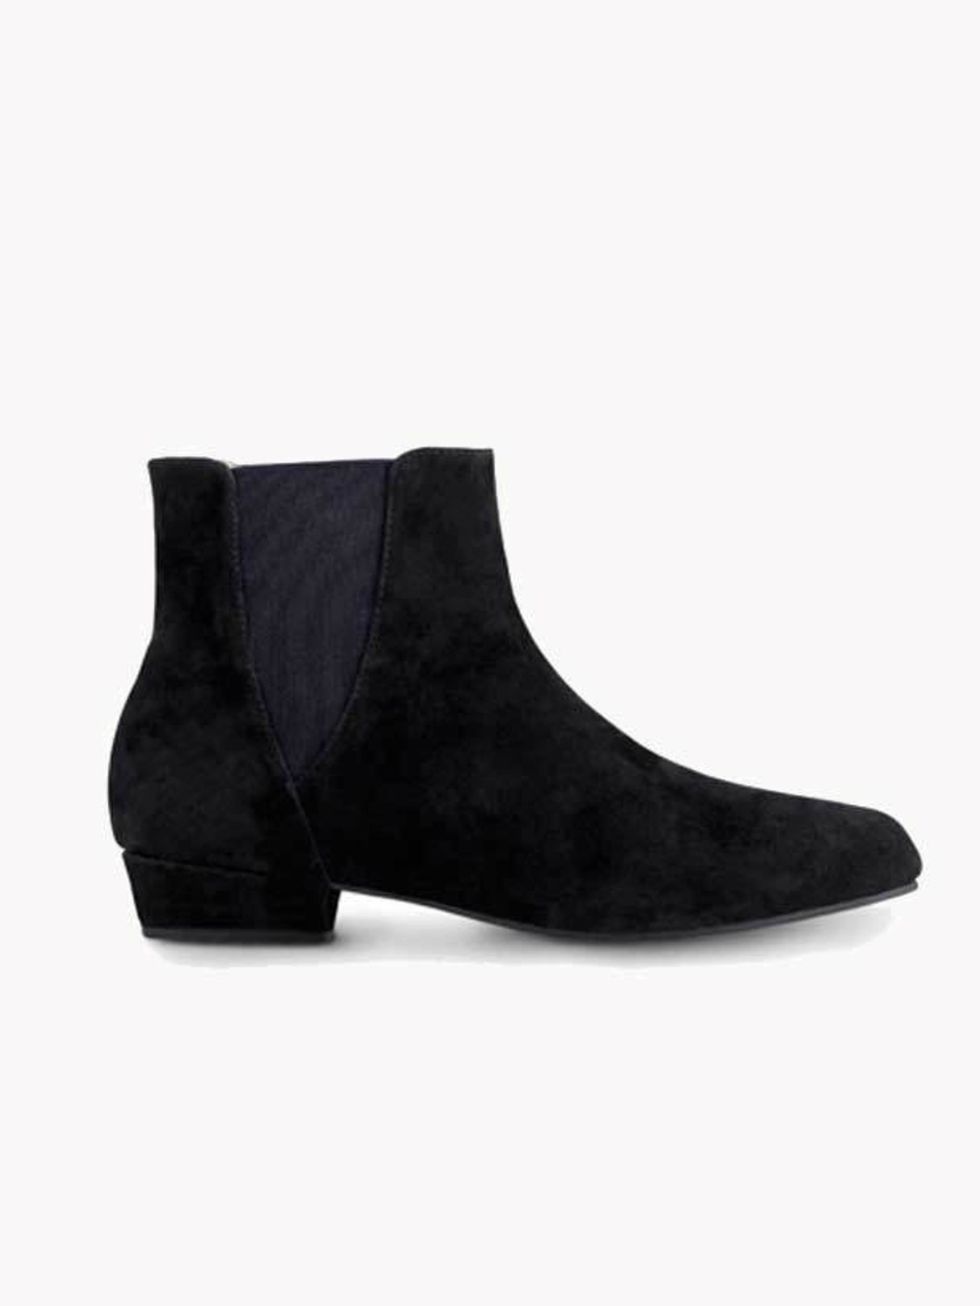 <p>Bloch suede Chelsea boots, £155, available from <a href="http://www.start-london.com/shop/bloch%20black%20chelsea%20boots-p-1806.html">Start London</a></p>